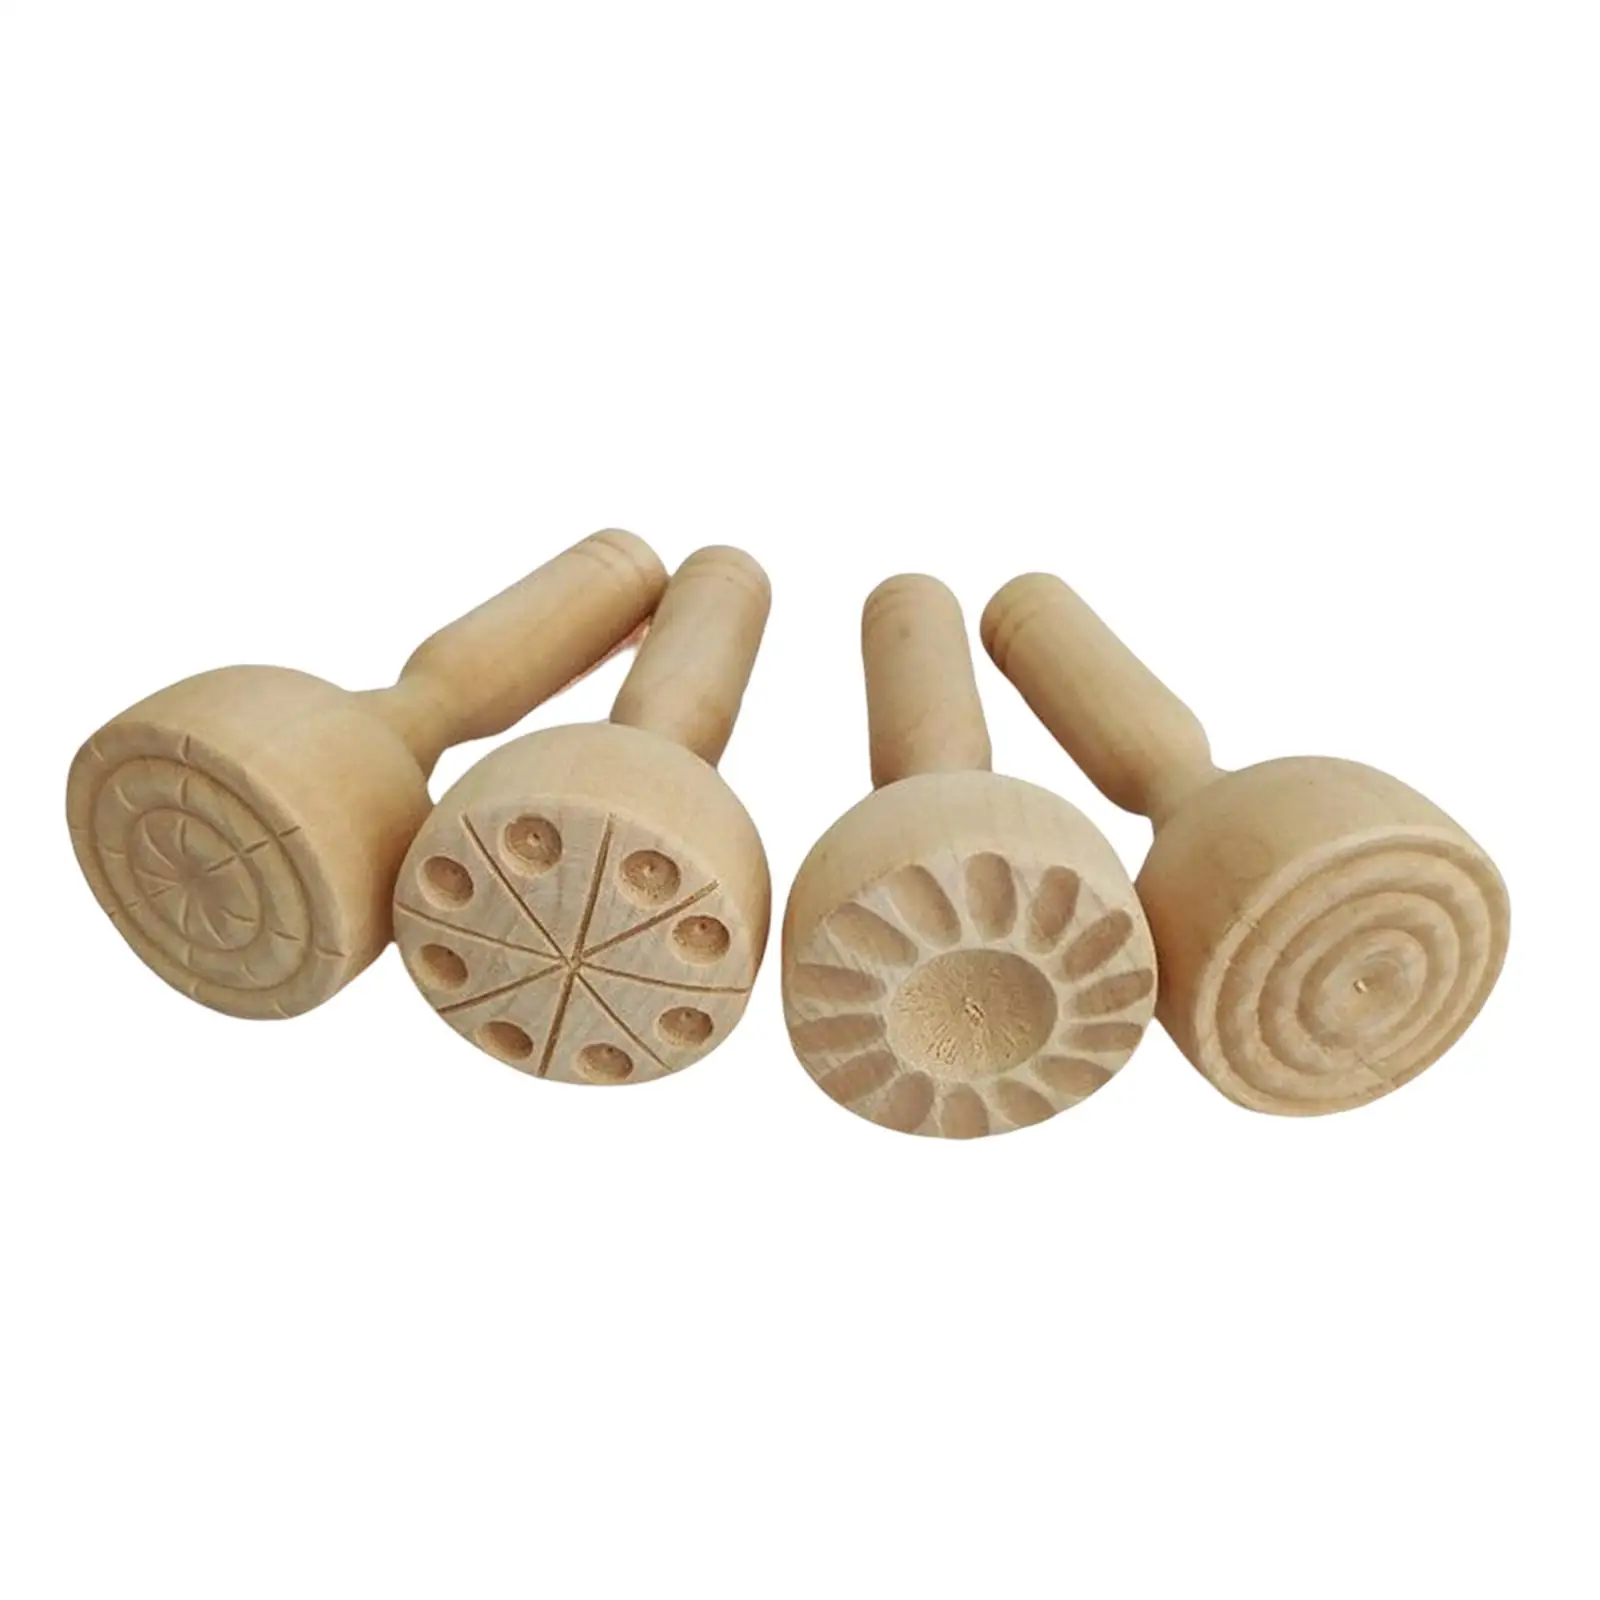 4 Pieces Wooden seal Moulds Press Molds Tools Making Molds DIY Decoration for Toddler Activity Supplies Child Art Craft